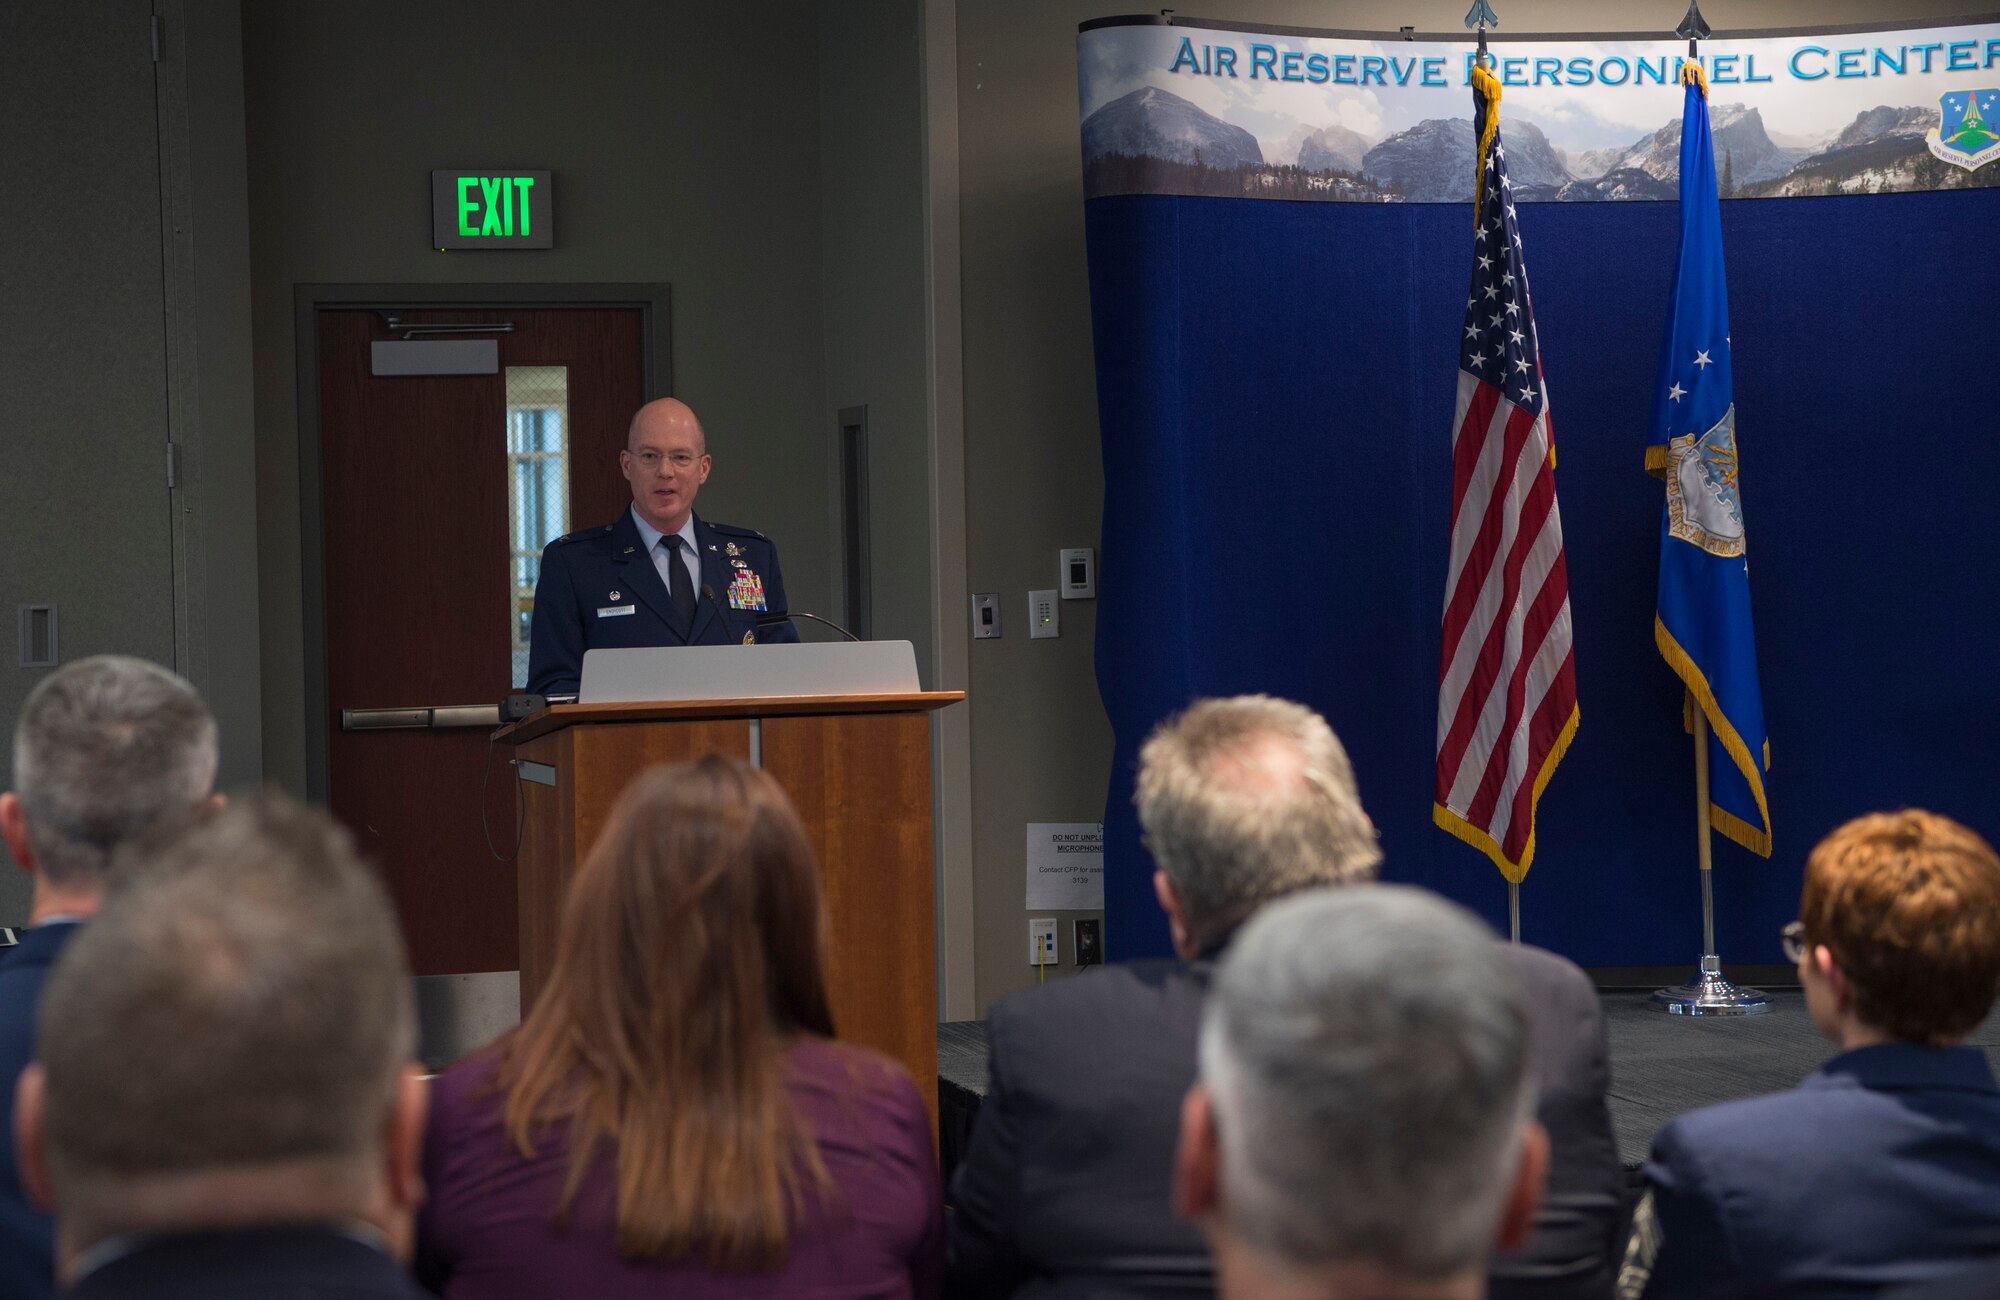 The Buckley AFB Honorary Commander Program’s purpose is to identify common interests between civilian and military life, and aims to support community efforts and to work together to solve mutual problems. (U.S. Air Force photo by Airman 1st Class Holden S. Faul)